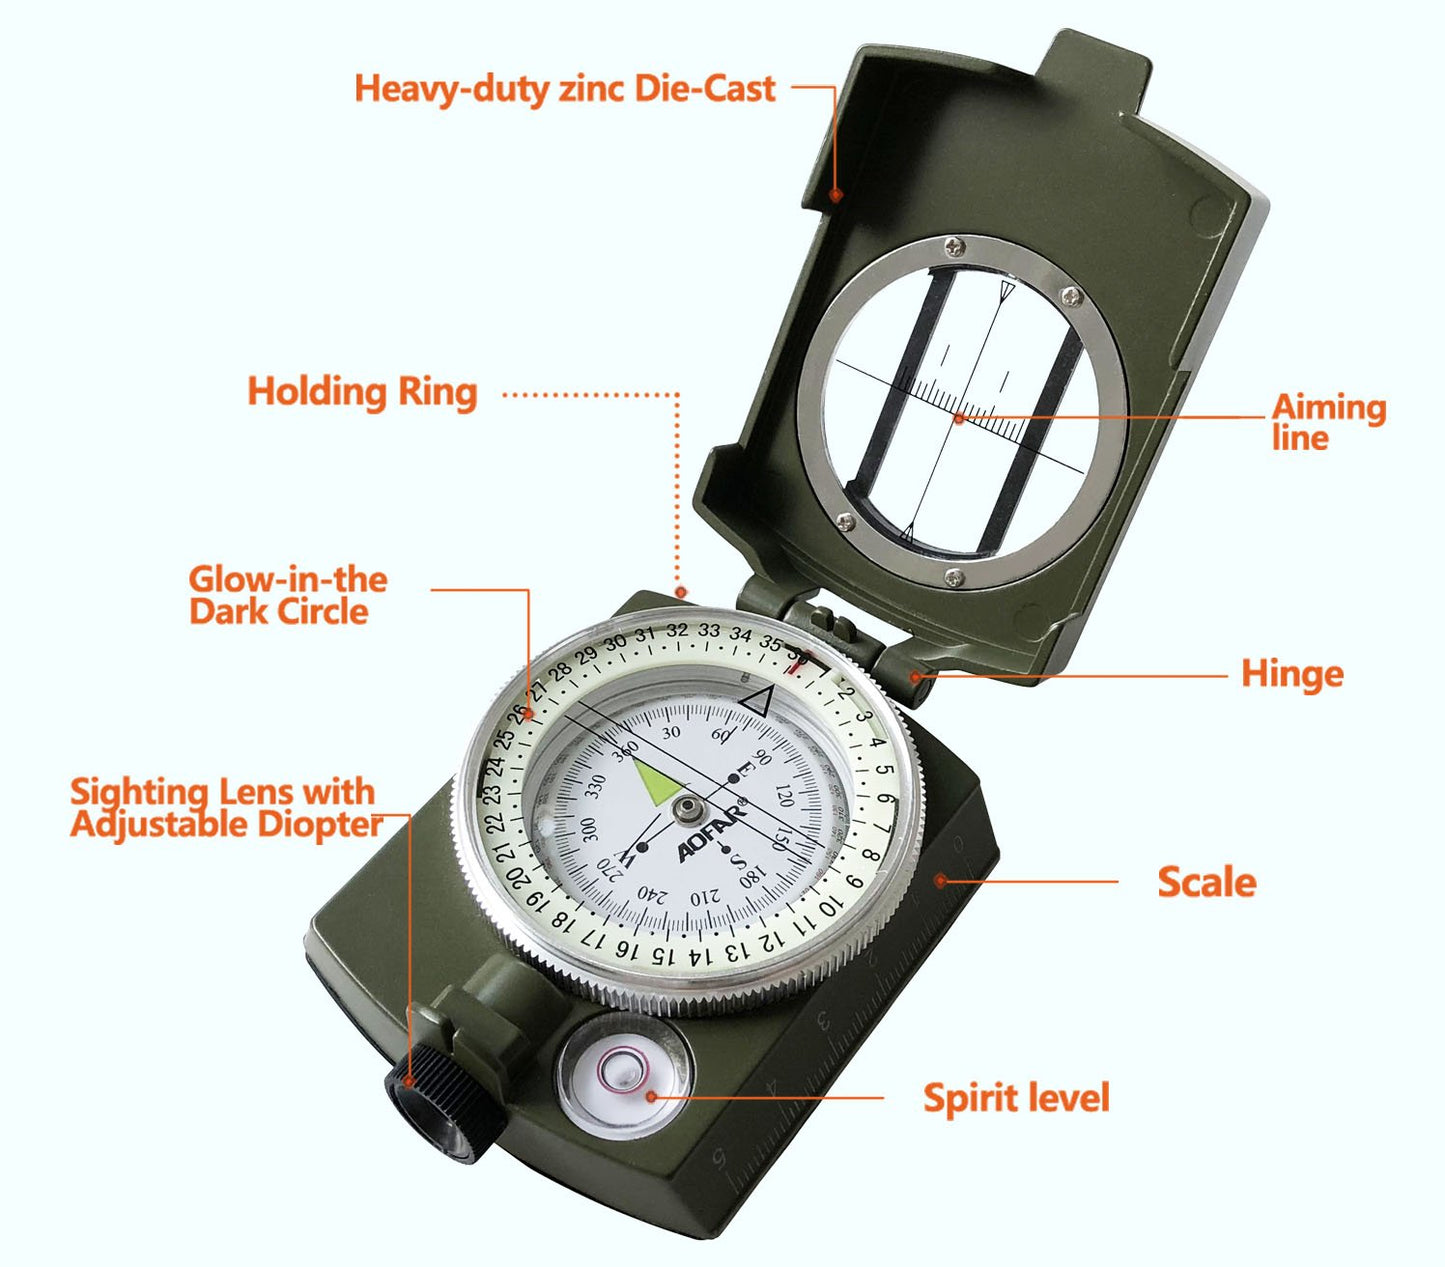 Military Compass, Lensatic Sighting, Waterproof And Shakeproof With Map Measurer Distance Calculator, Pouch For Camping, Hiking